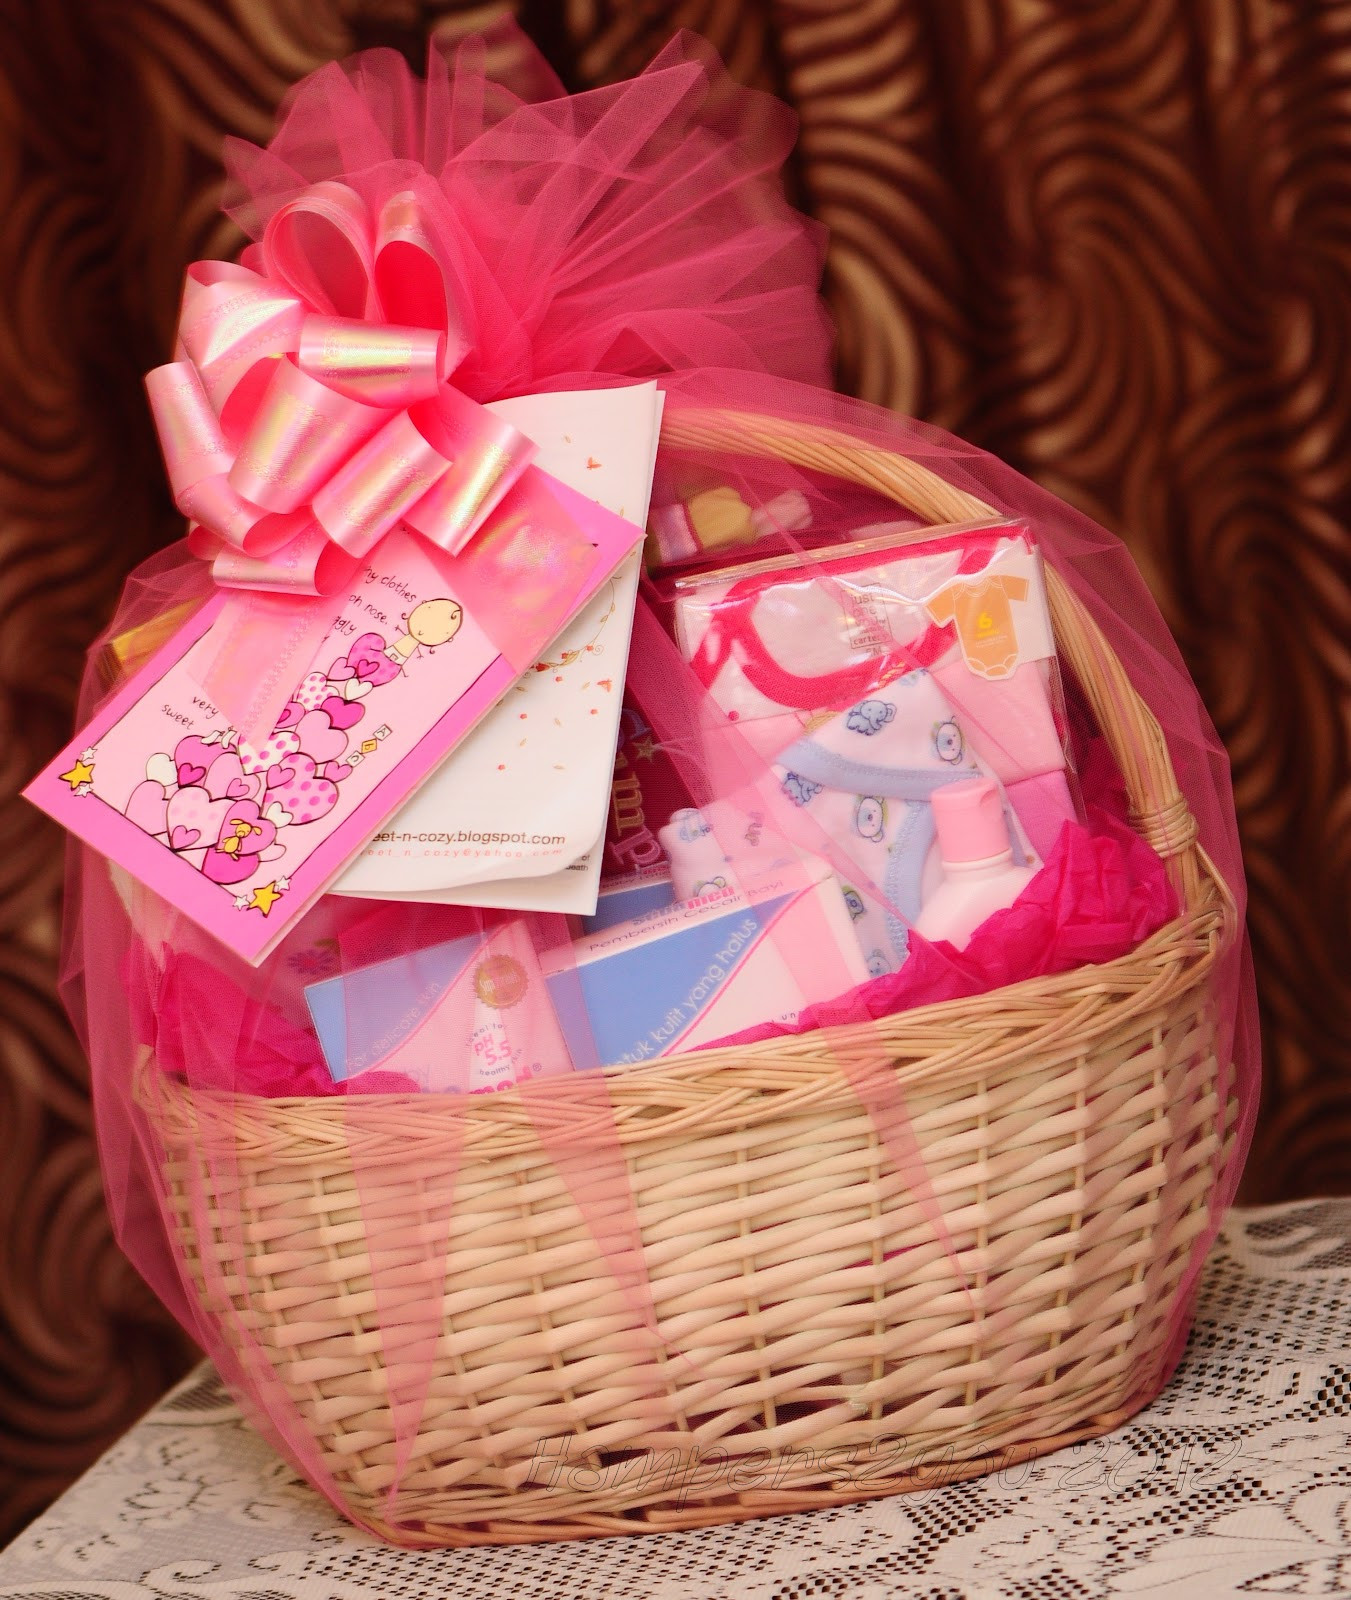 Toddler Girls Gift Ideas
 Hampers2you Baby Gift Baskets for Newborn Girl